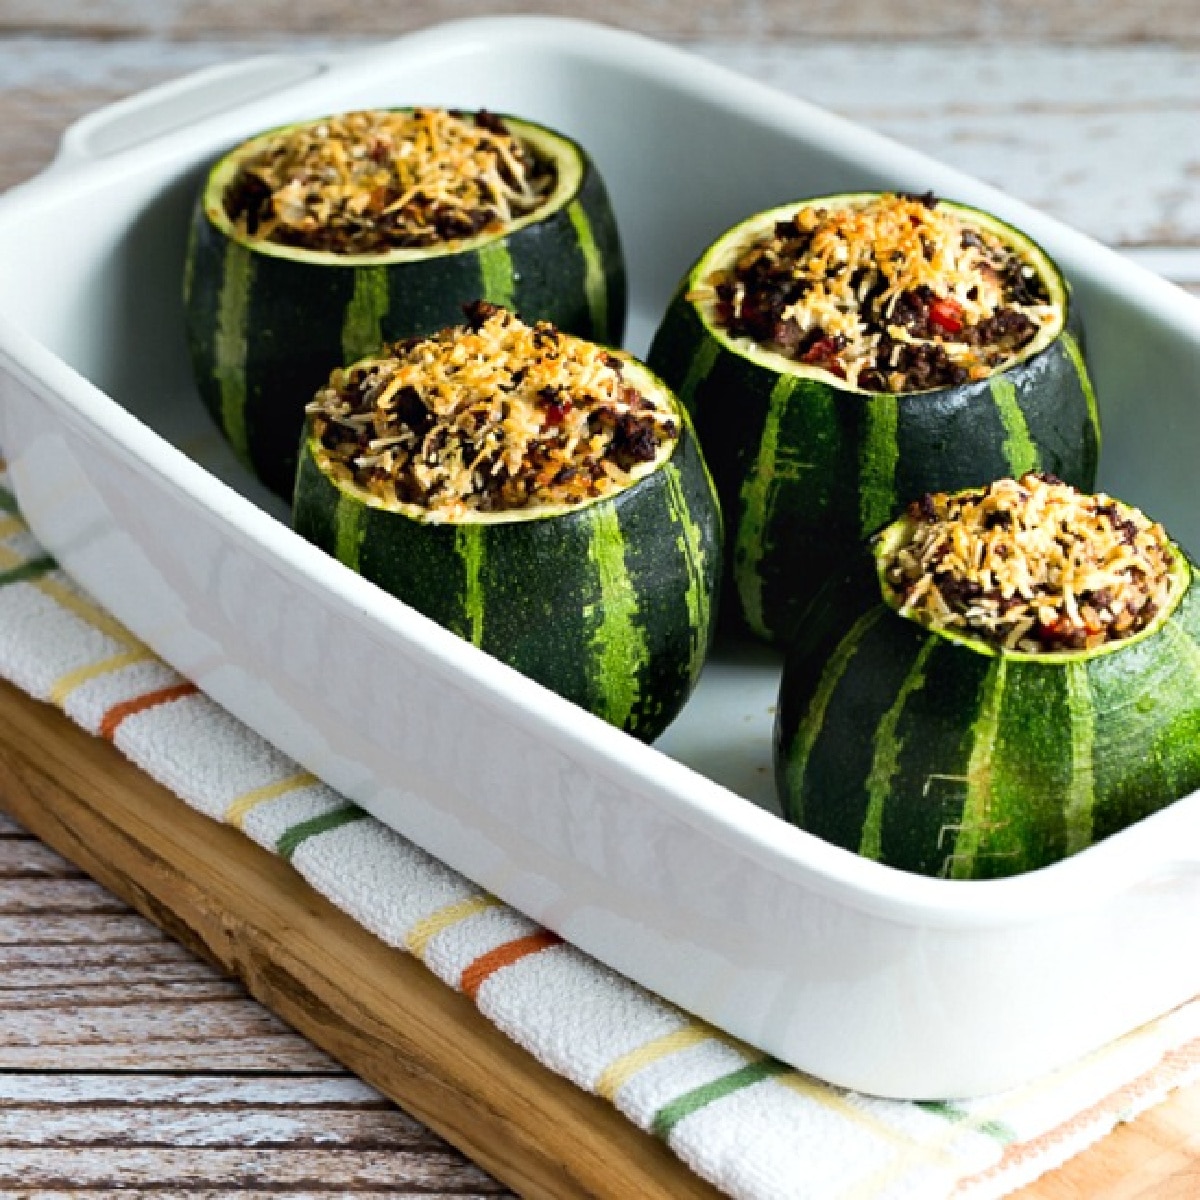 square image of Stuffed Zucchini with Ground Beef shown in baking dish